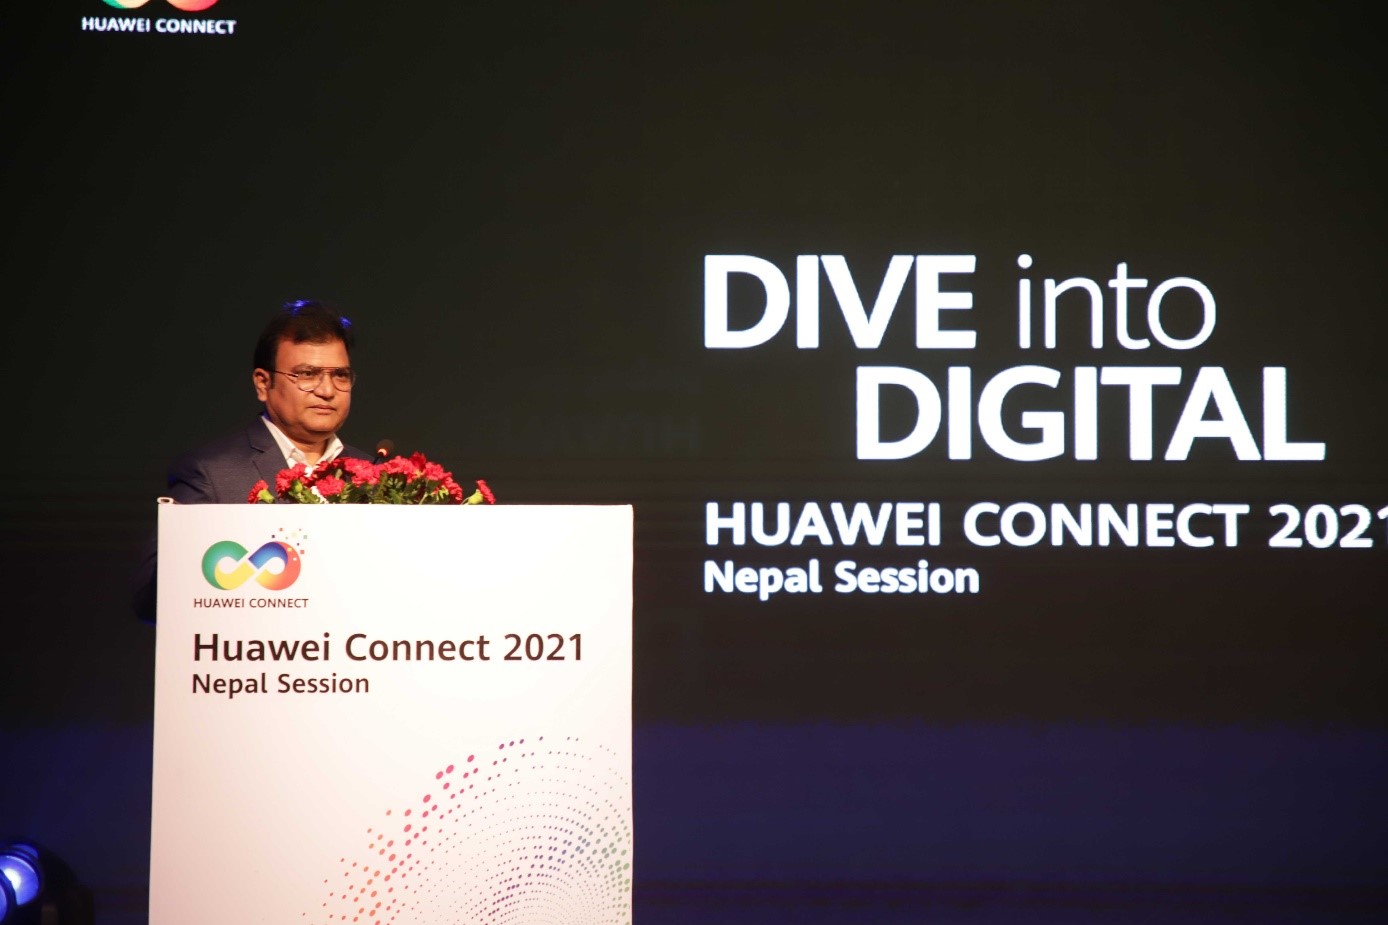 Mr. Anil K. Dutta - Hon’ble Joint Secretary, Ministry of Communications and Information Technology